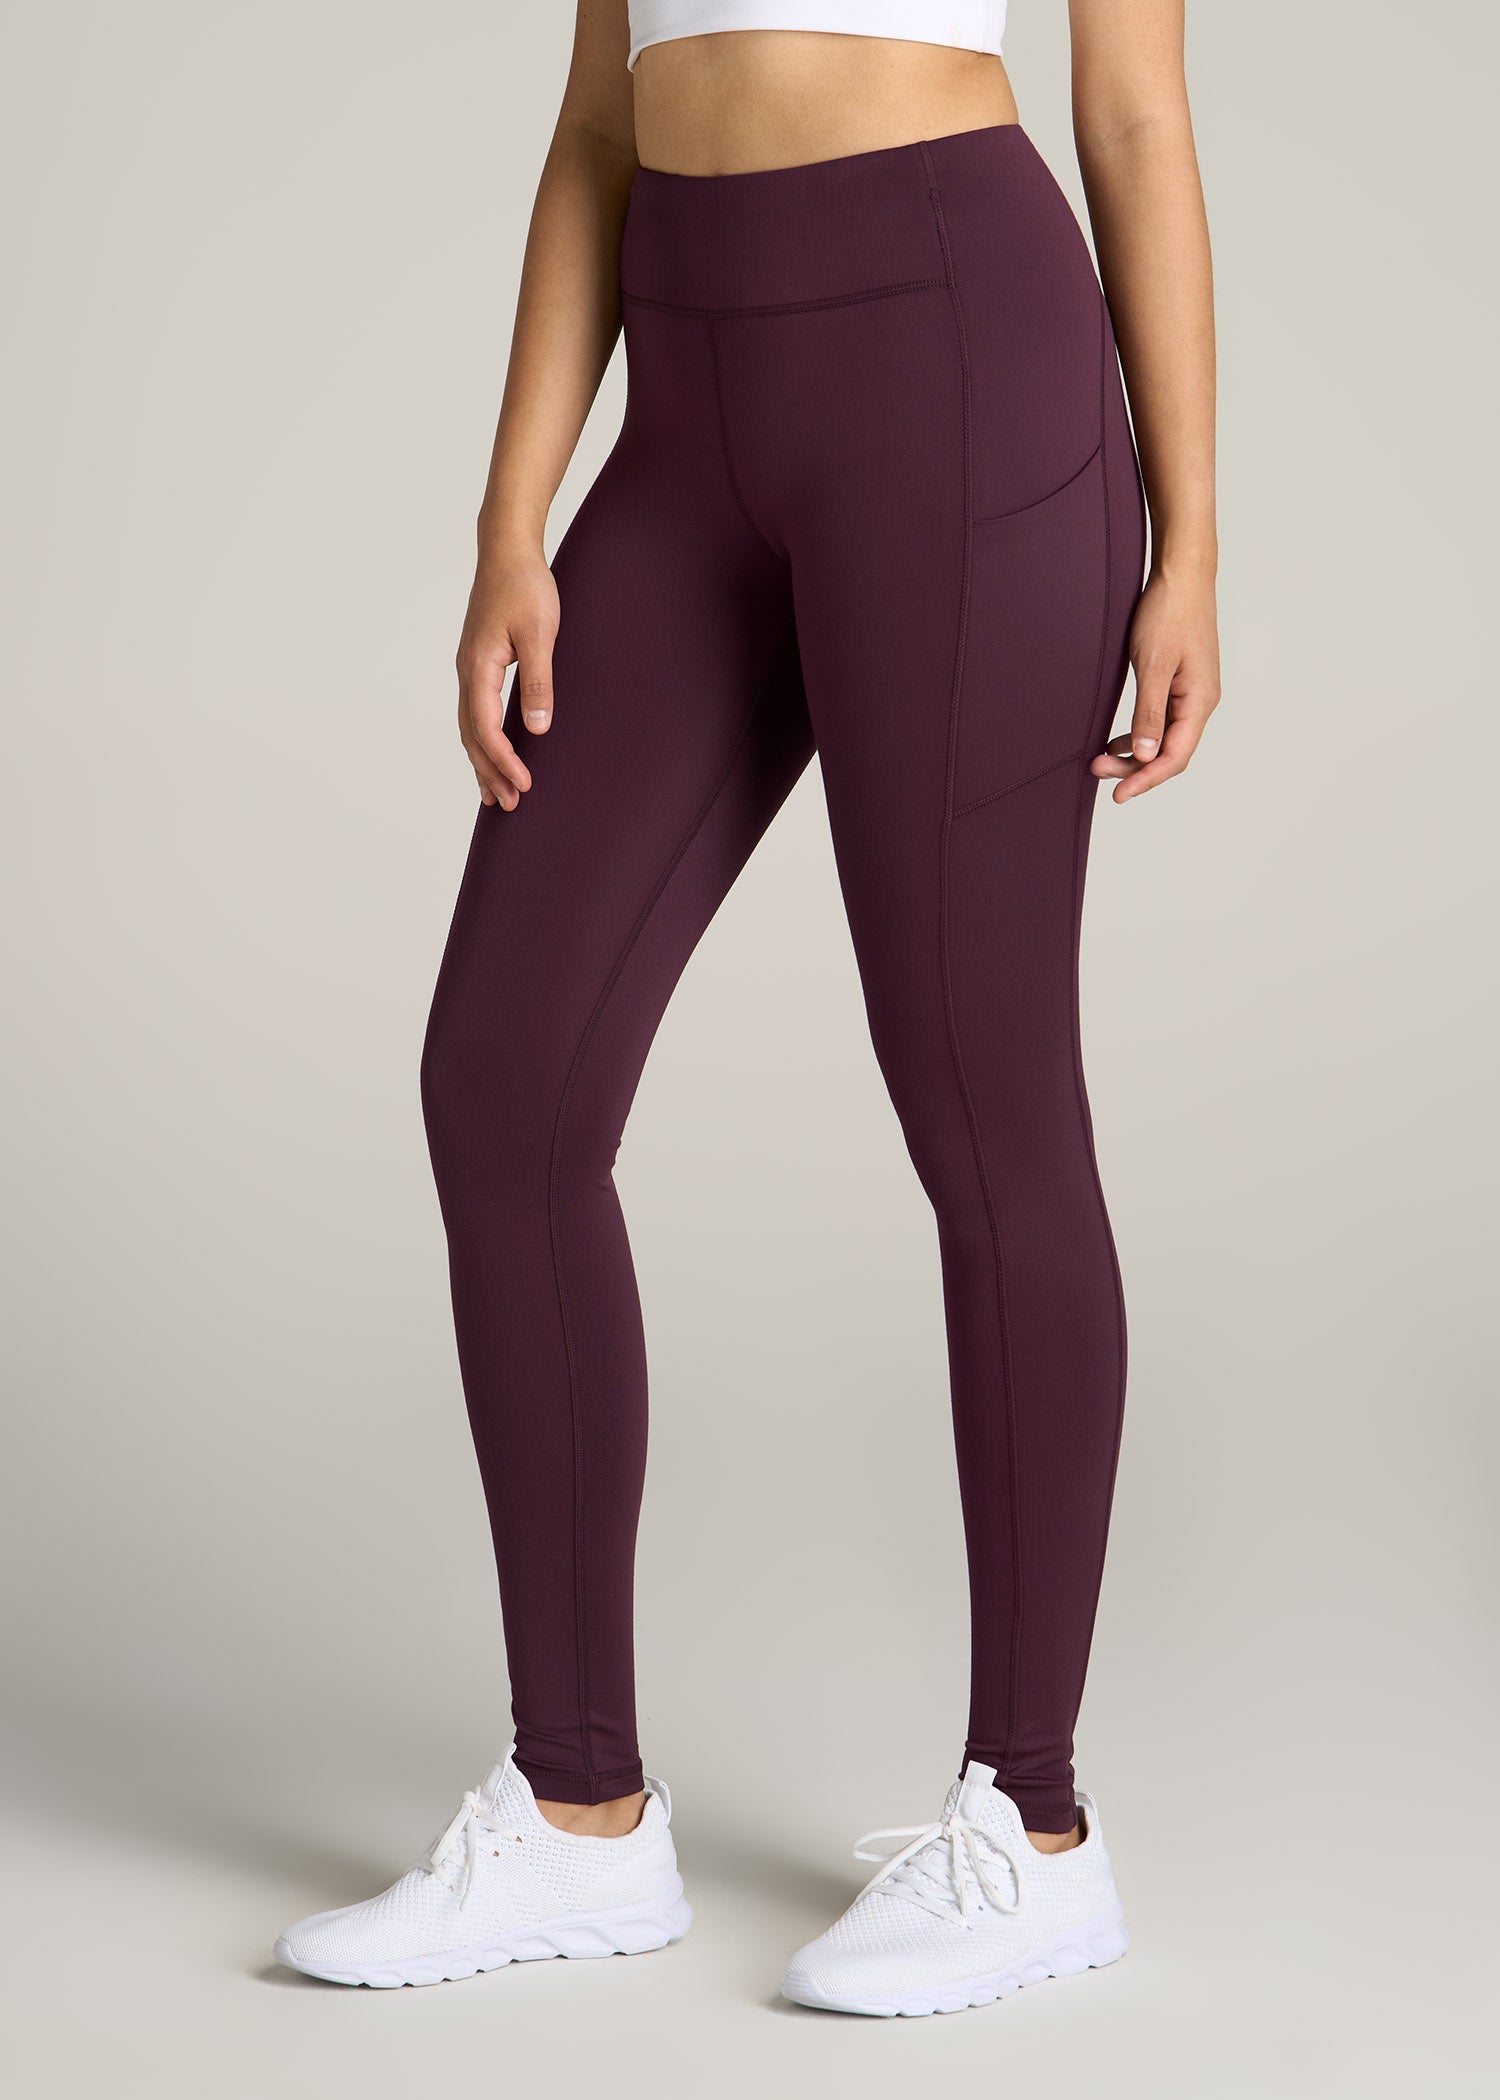 Leggings With Pockets For Women